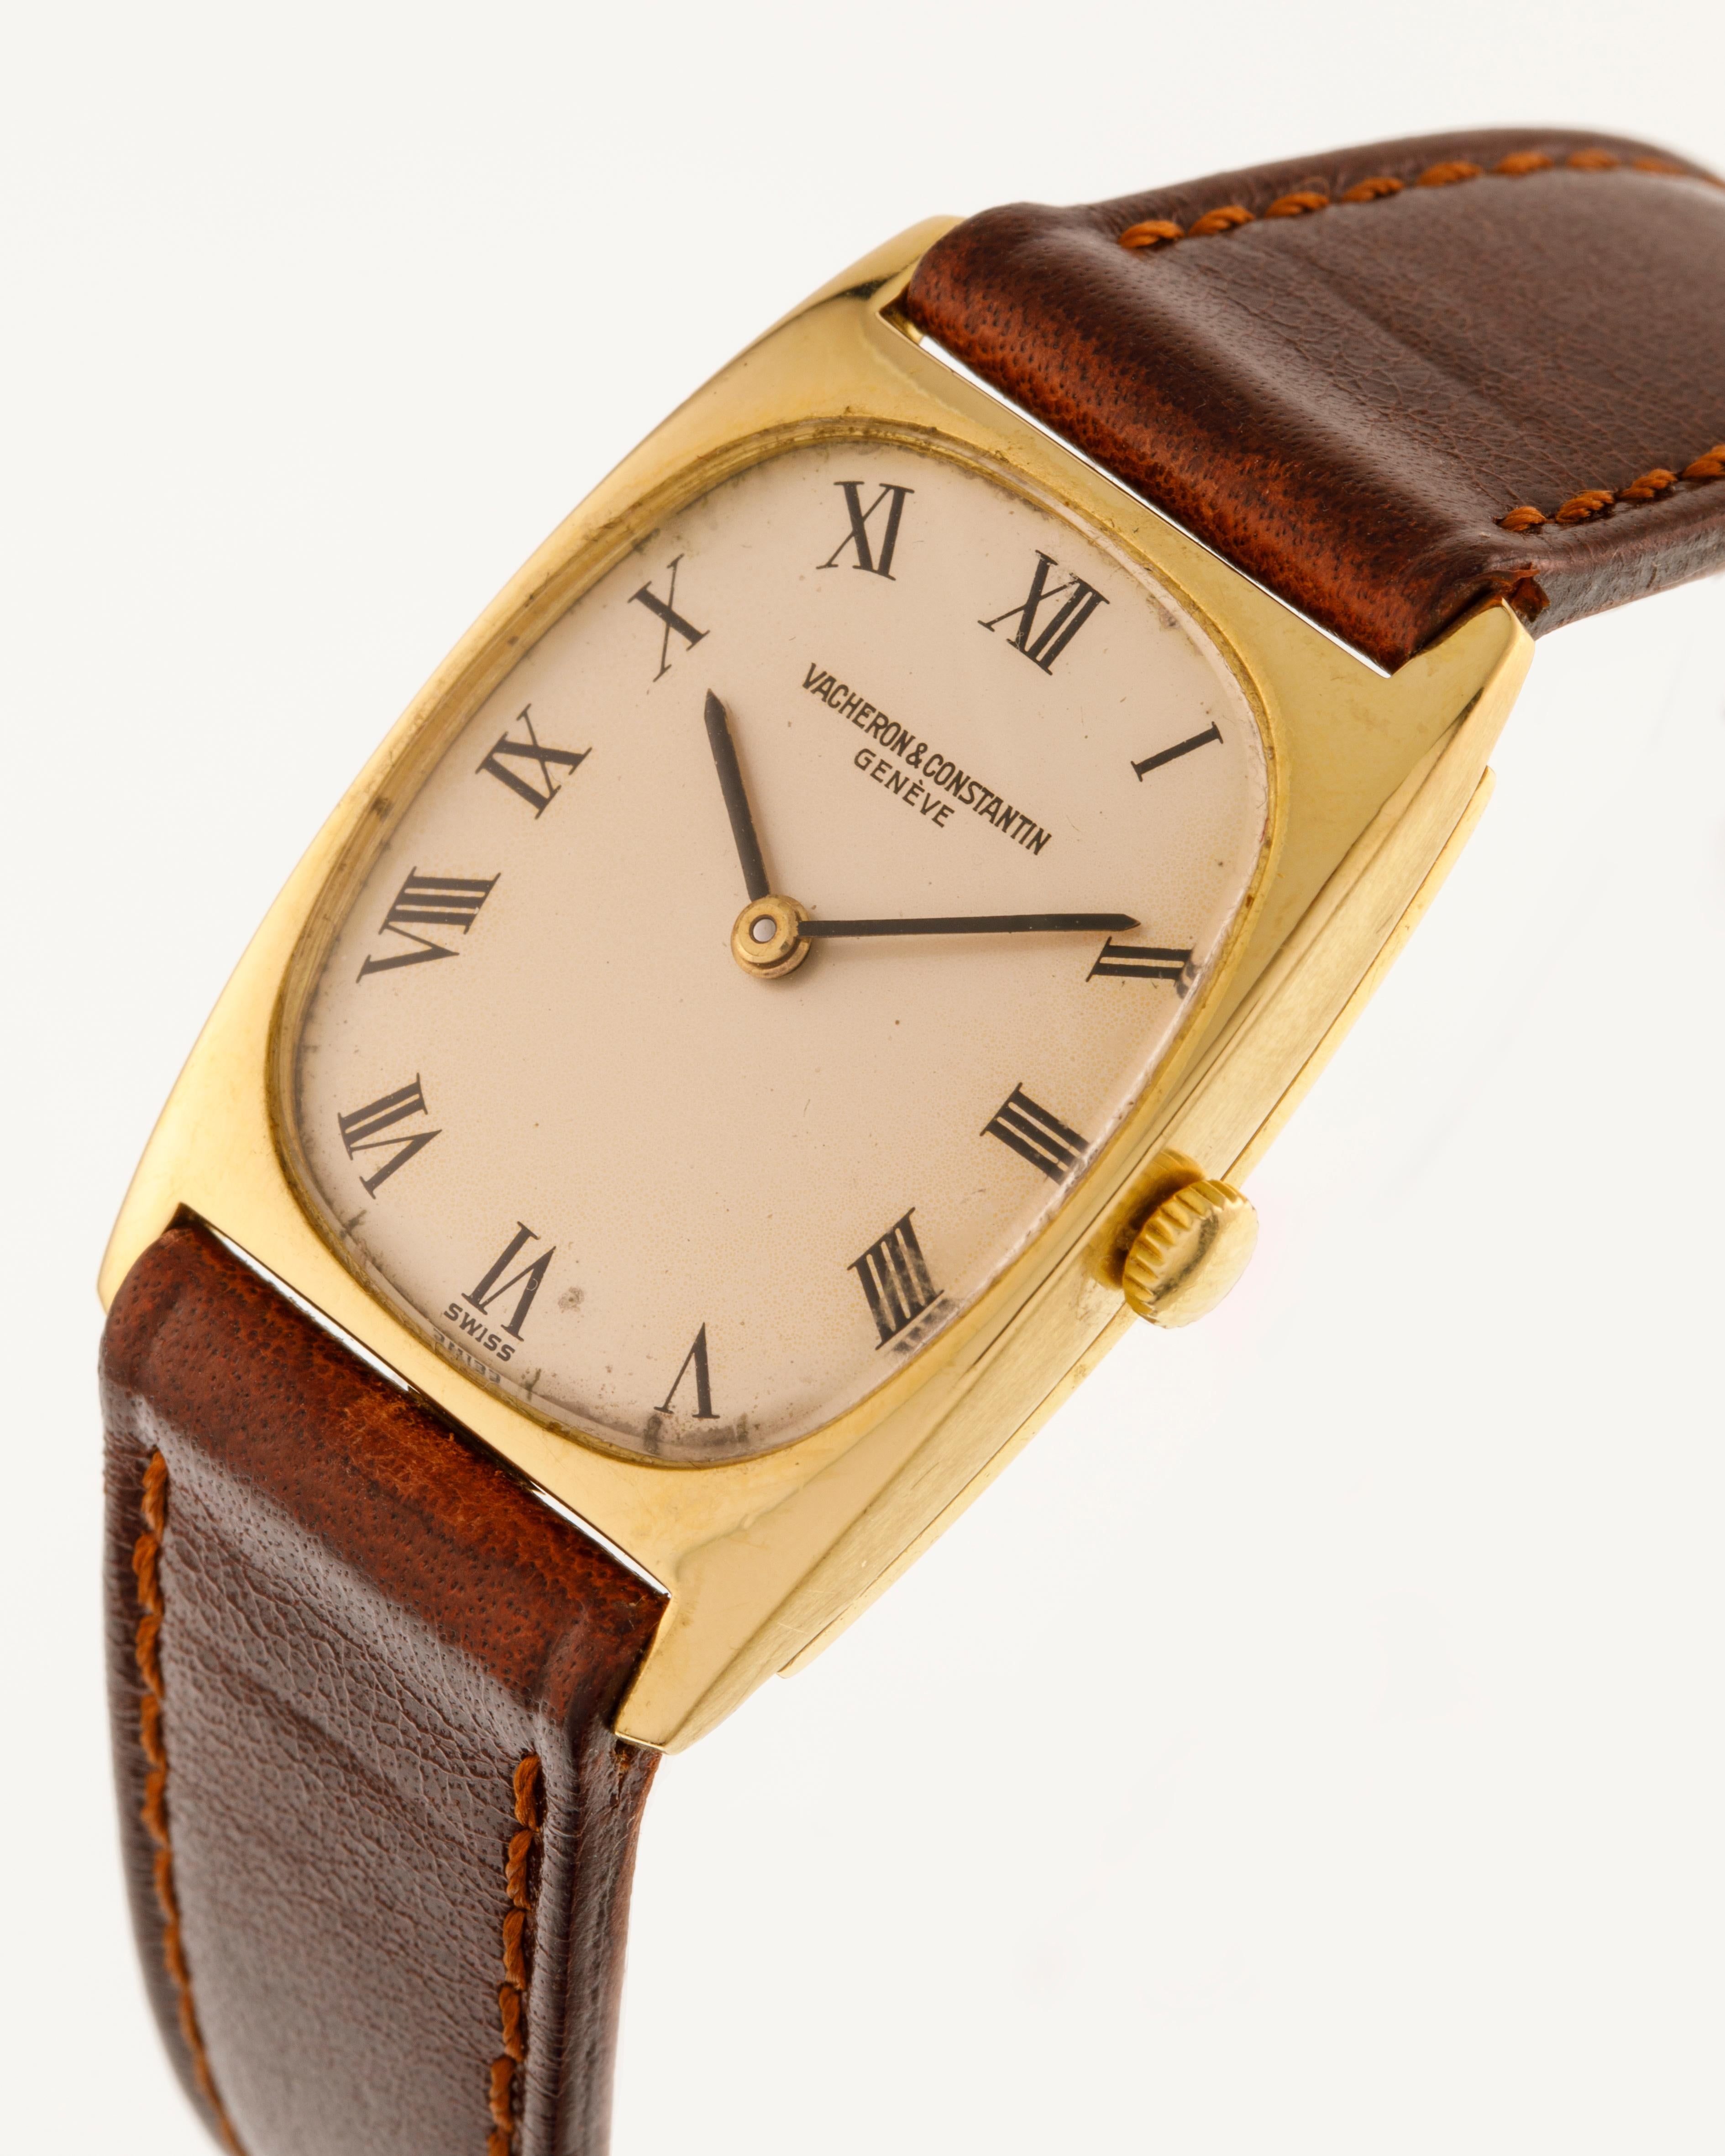 Case: rectangular case in 18 kt yellow gold in two parts snap on back and crown.

Dial: white with Romans indexes, black graphics and buttons hands. 

Movement: manual winding 

Year: 1950 circa

 
The watch is accompanied by our certificate of